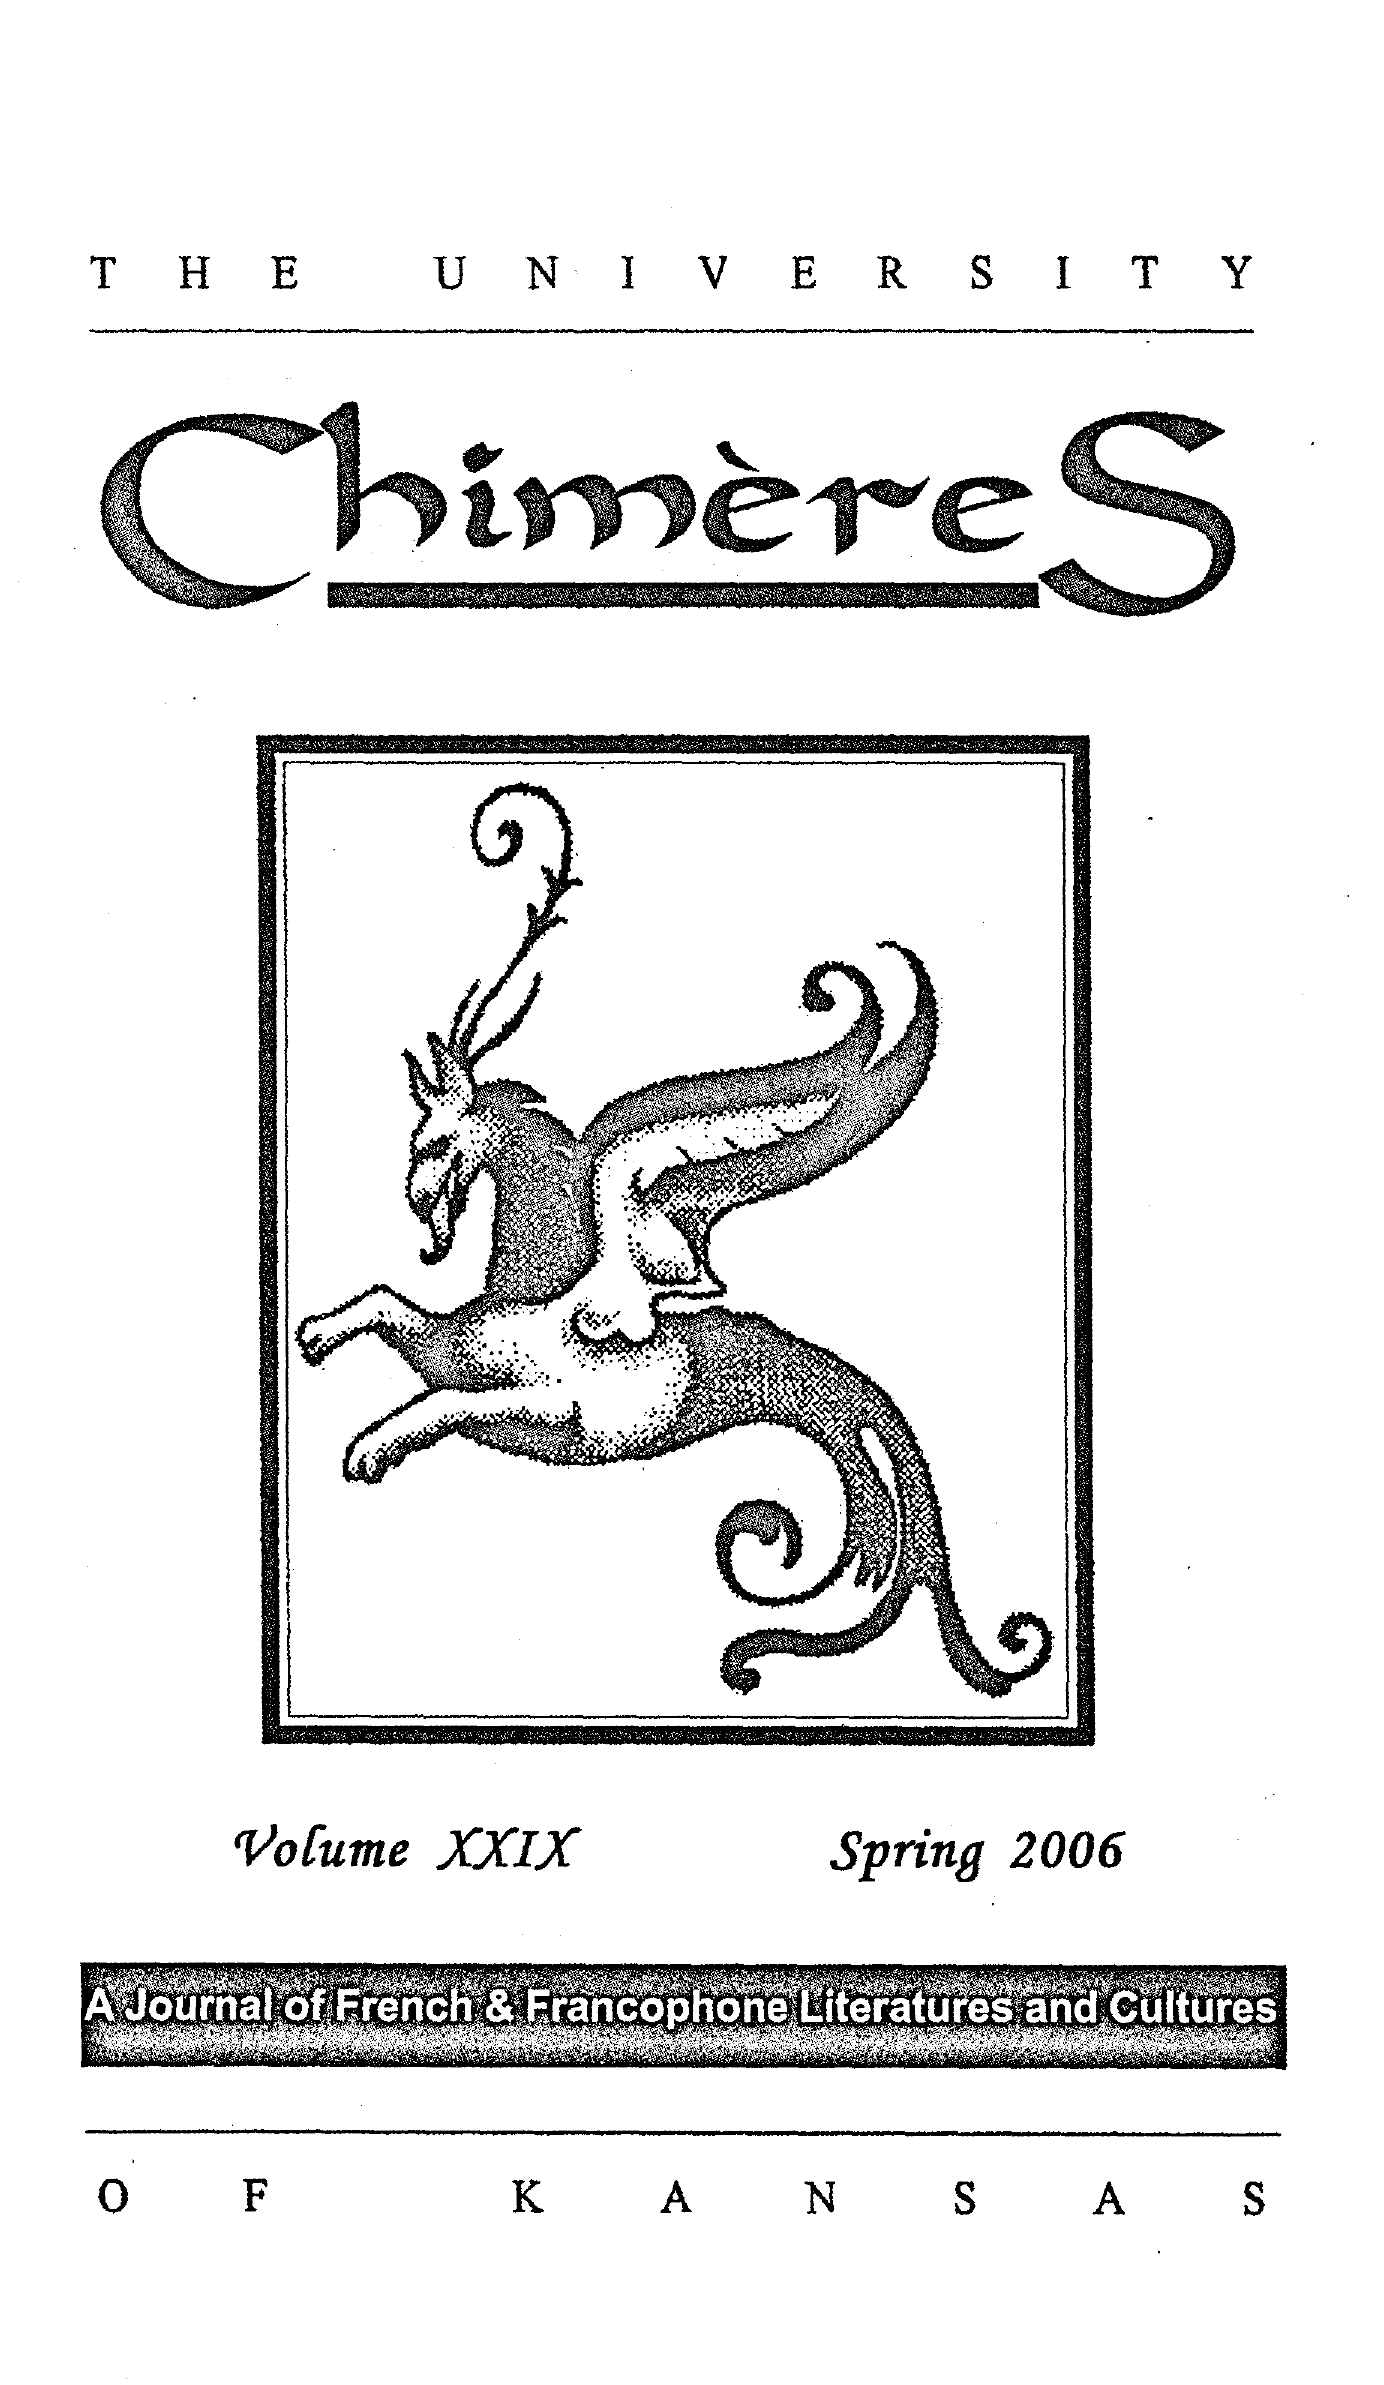 Cover for Chimères, Vol. 29, Spring 2006